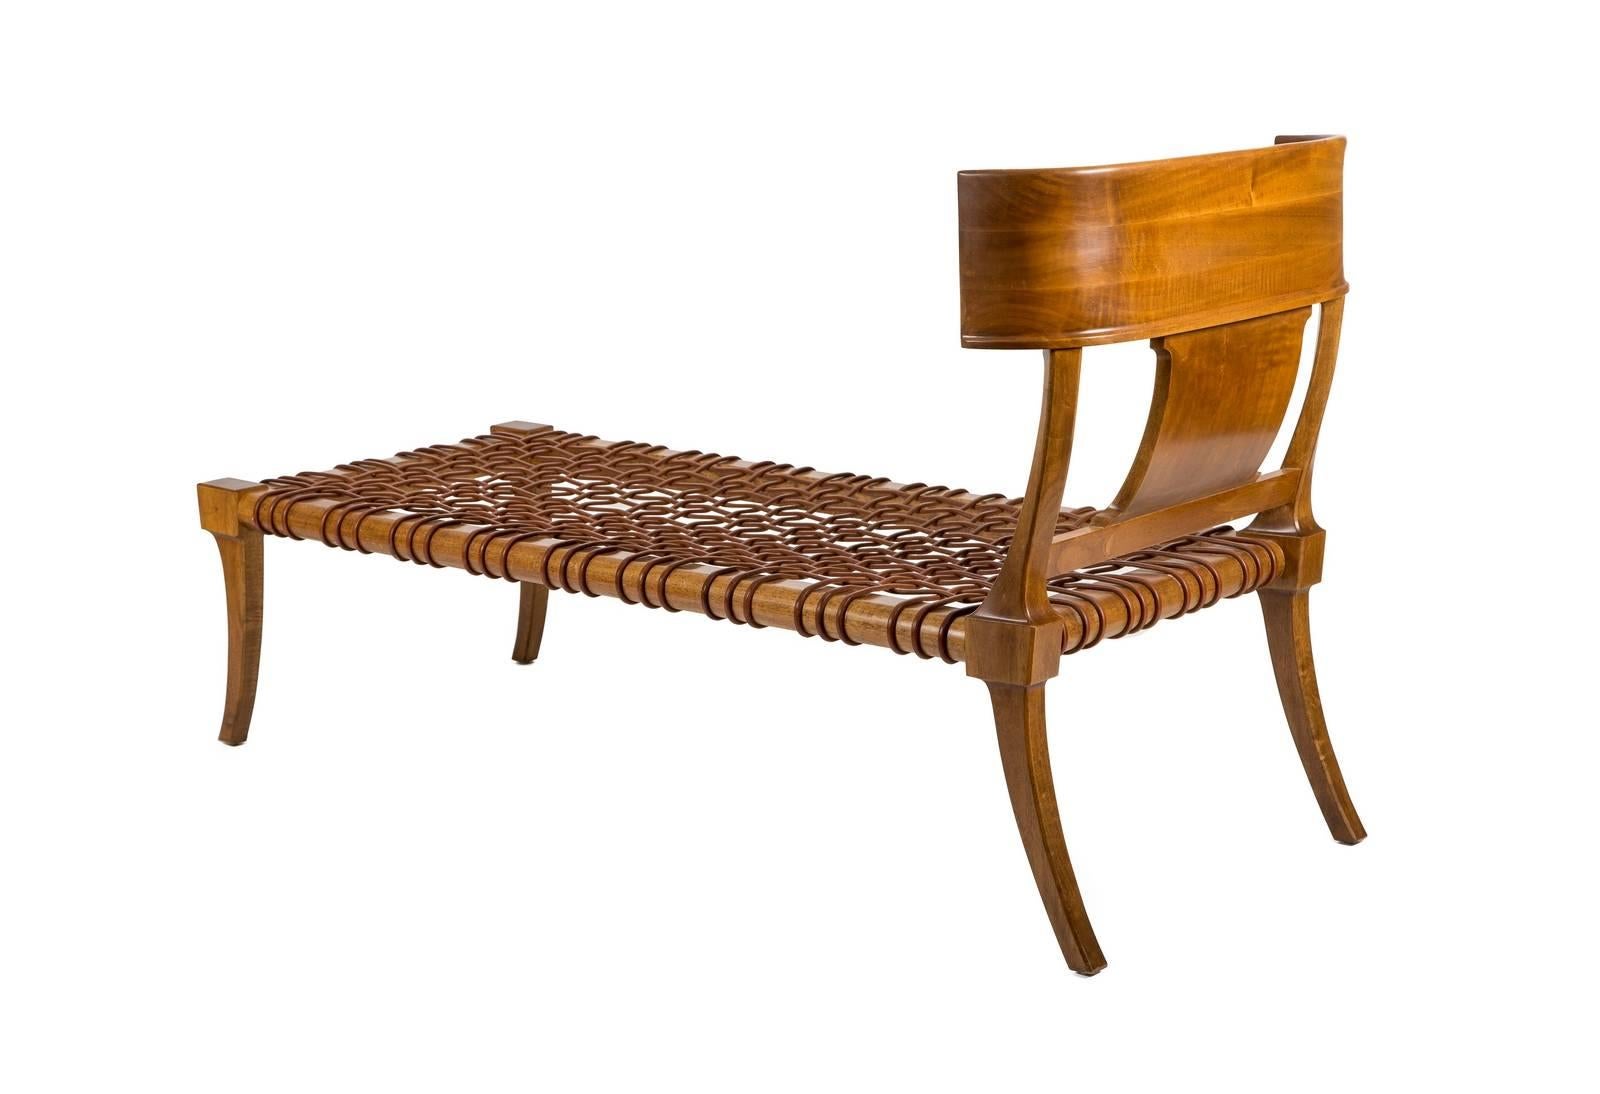 Mid-Century Modern Chaise Longue by T.H. Robsjohn-Gibbings for Saridis of Athens